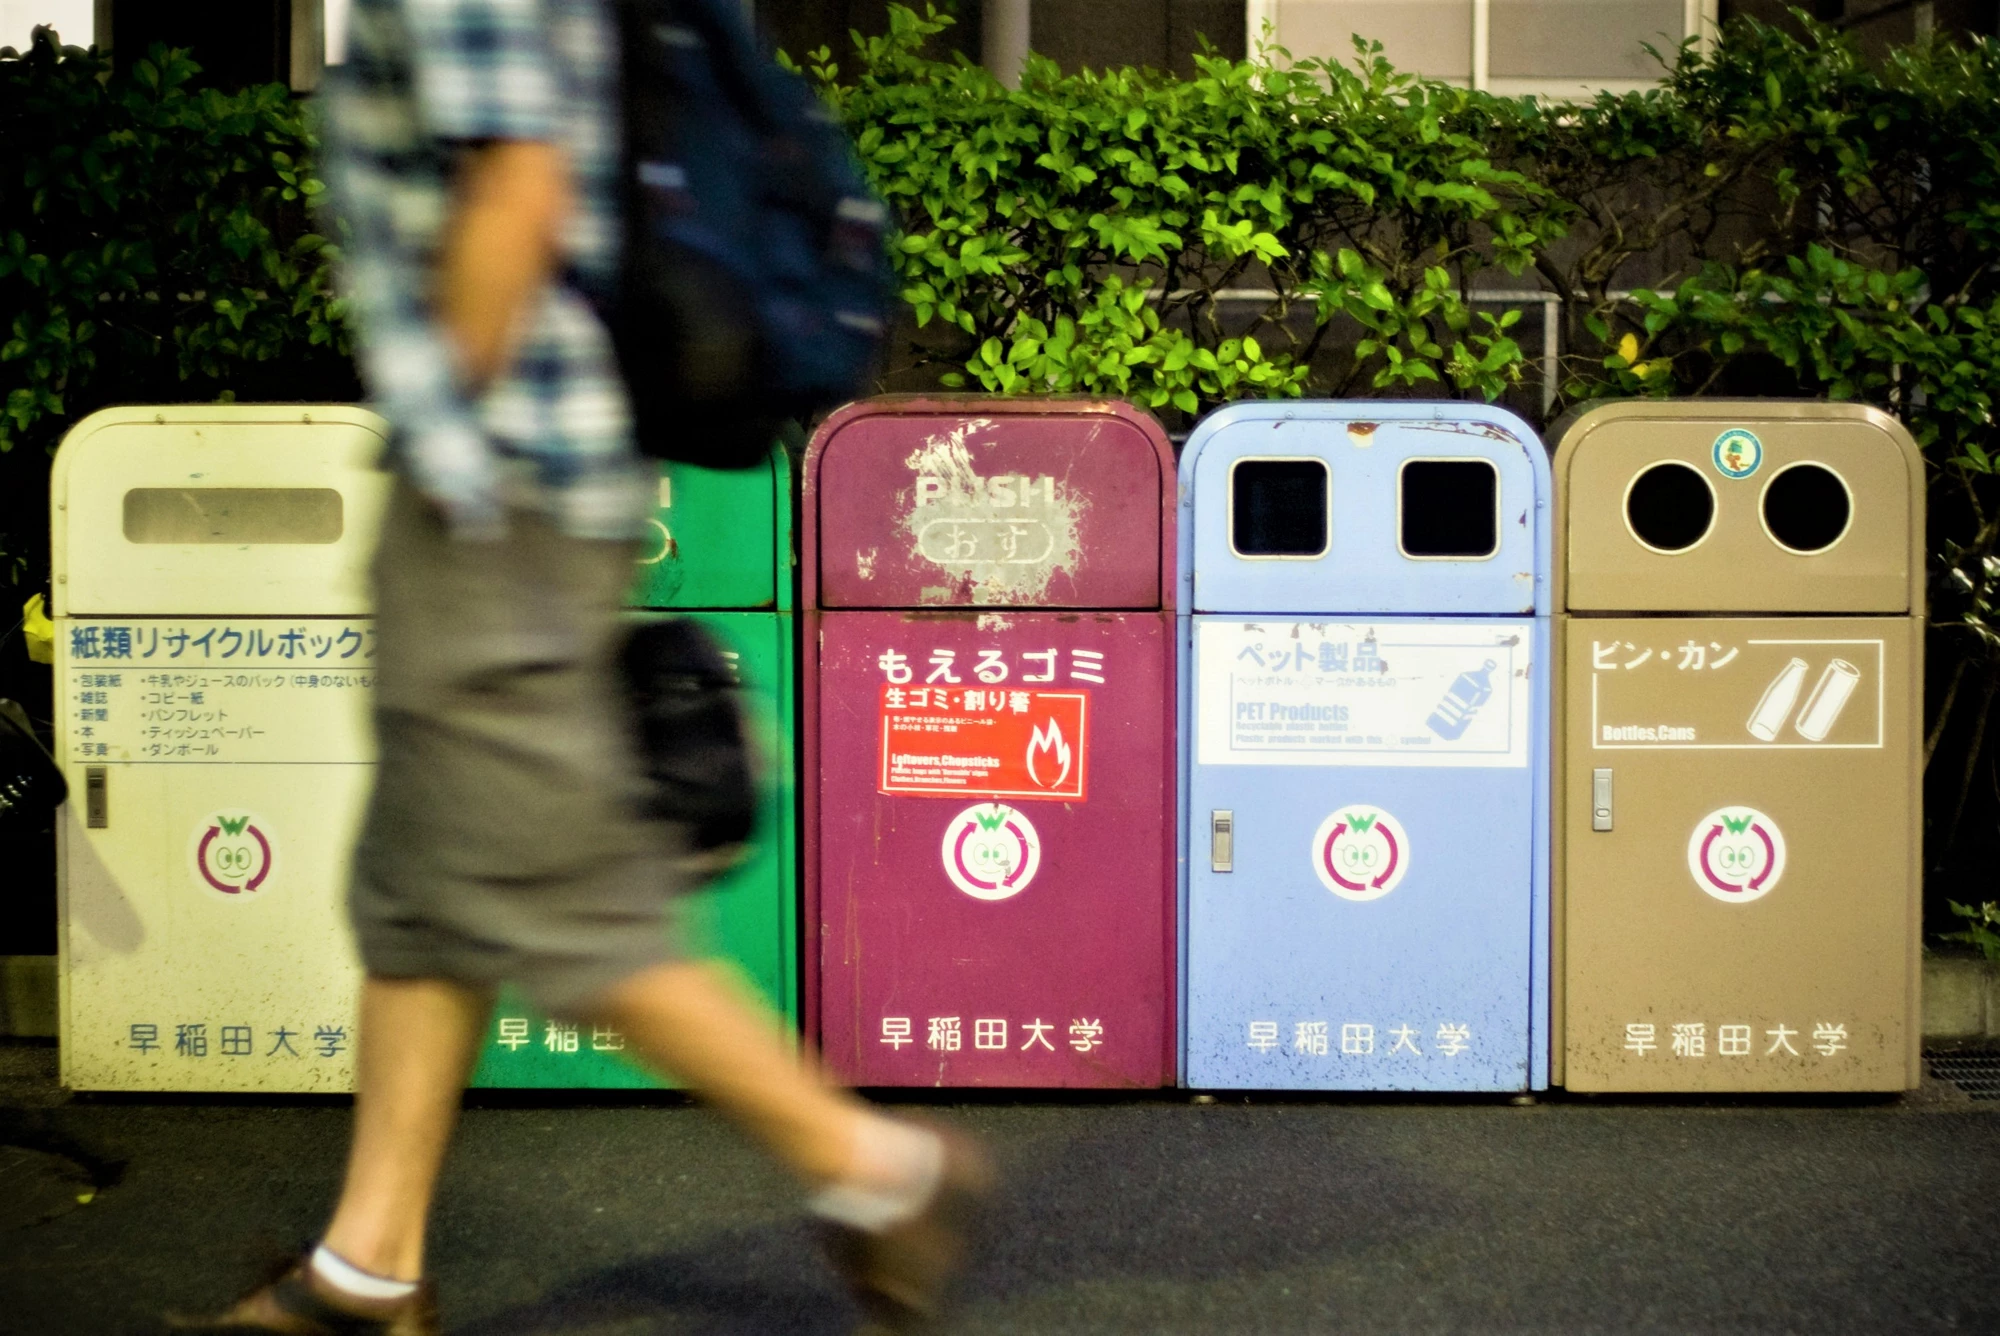 Recycling bins on the campus of Waseda University in Tokyo, Japan (Photo by elmimmo via Flickr CC)